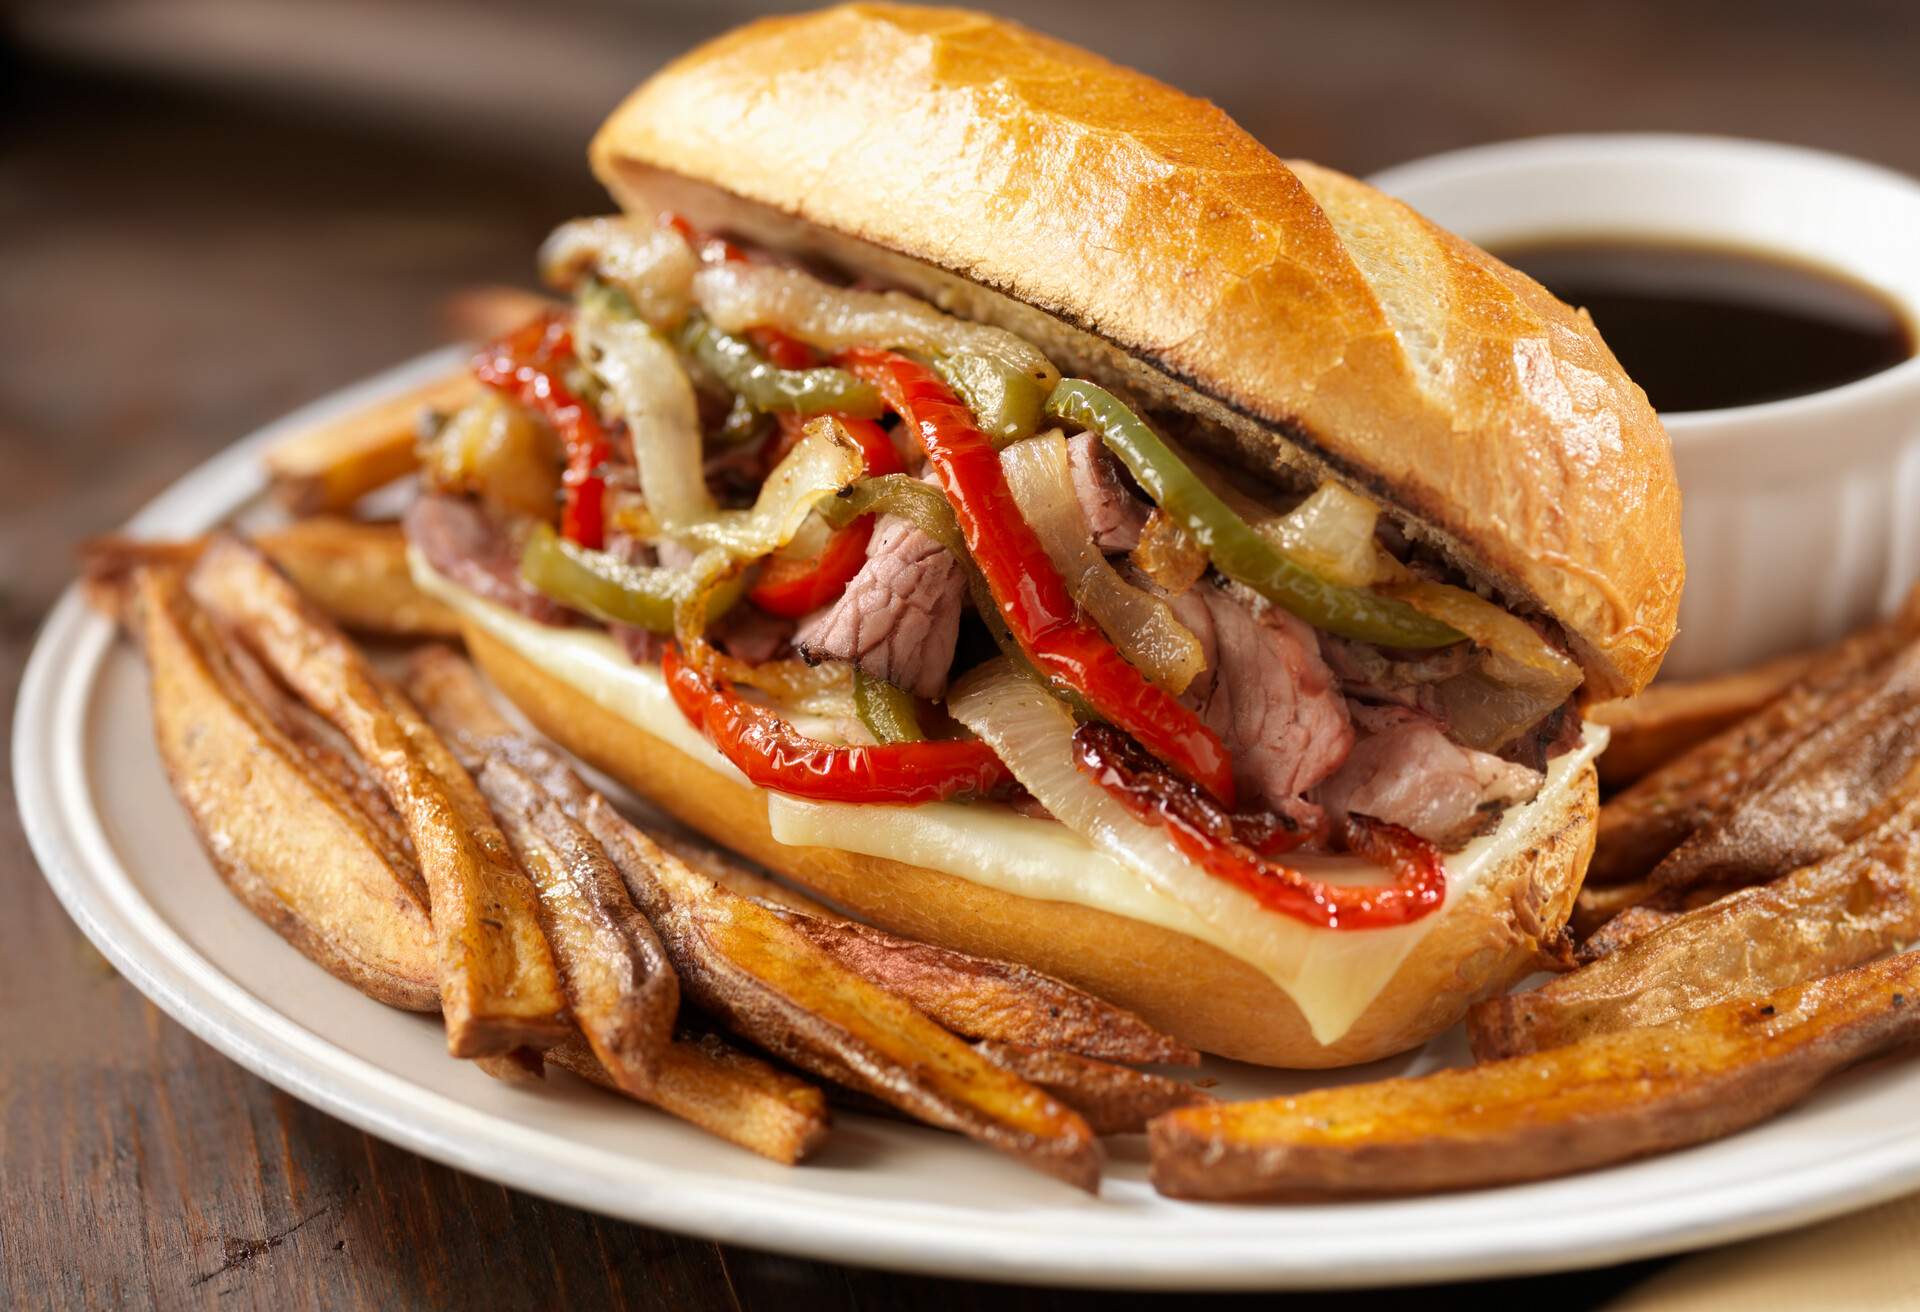 Philly Prime Rib Sandwich with Roasted Onions, Peppers and Melted Cheese on a Toasted Crusty French Roll with French Fries and Au Jus -Photographed on Hasselblad H3D2-39mb Camera